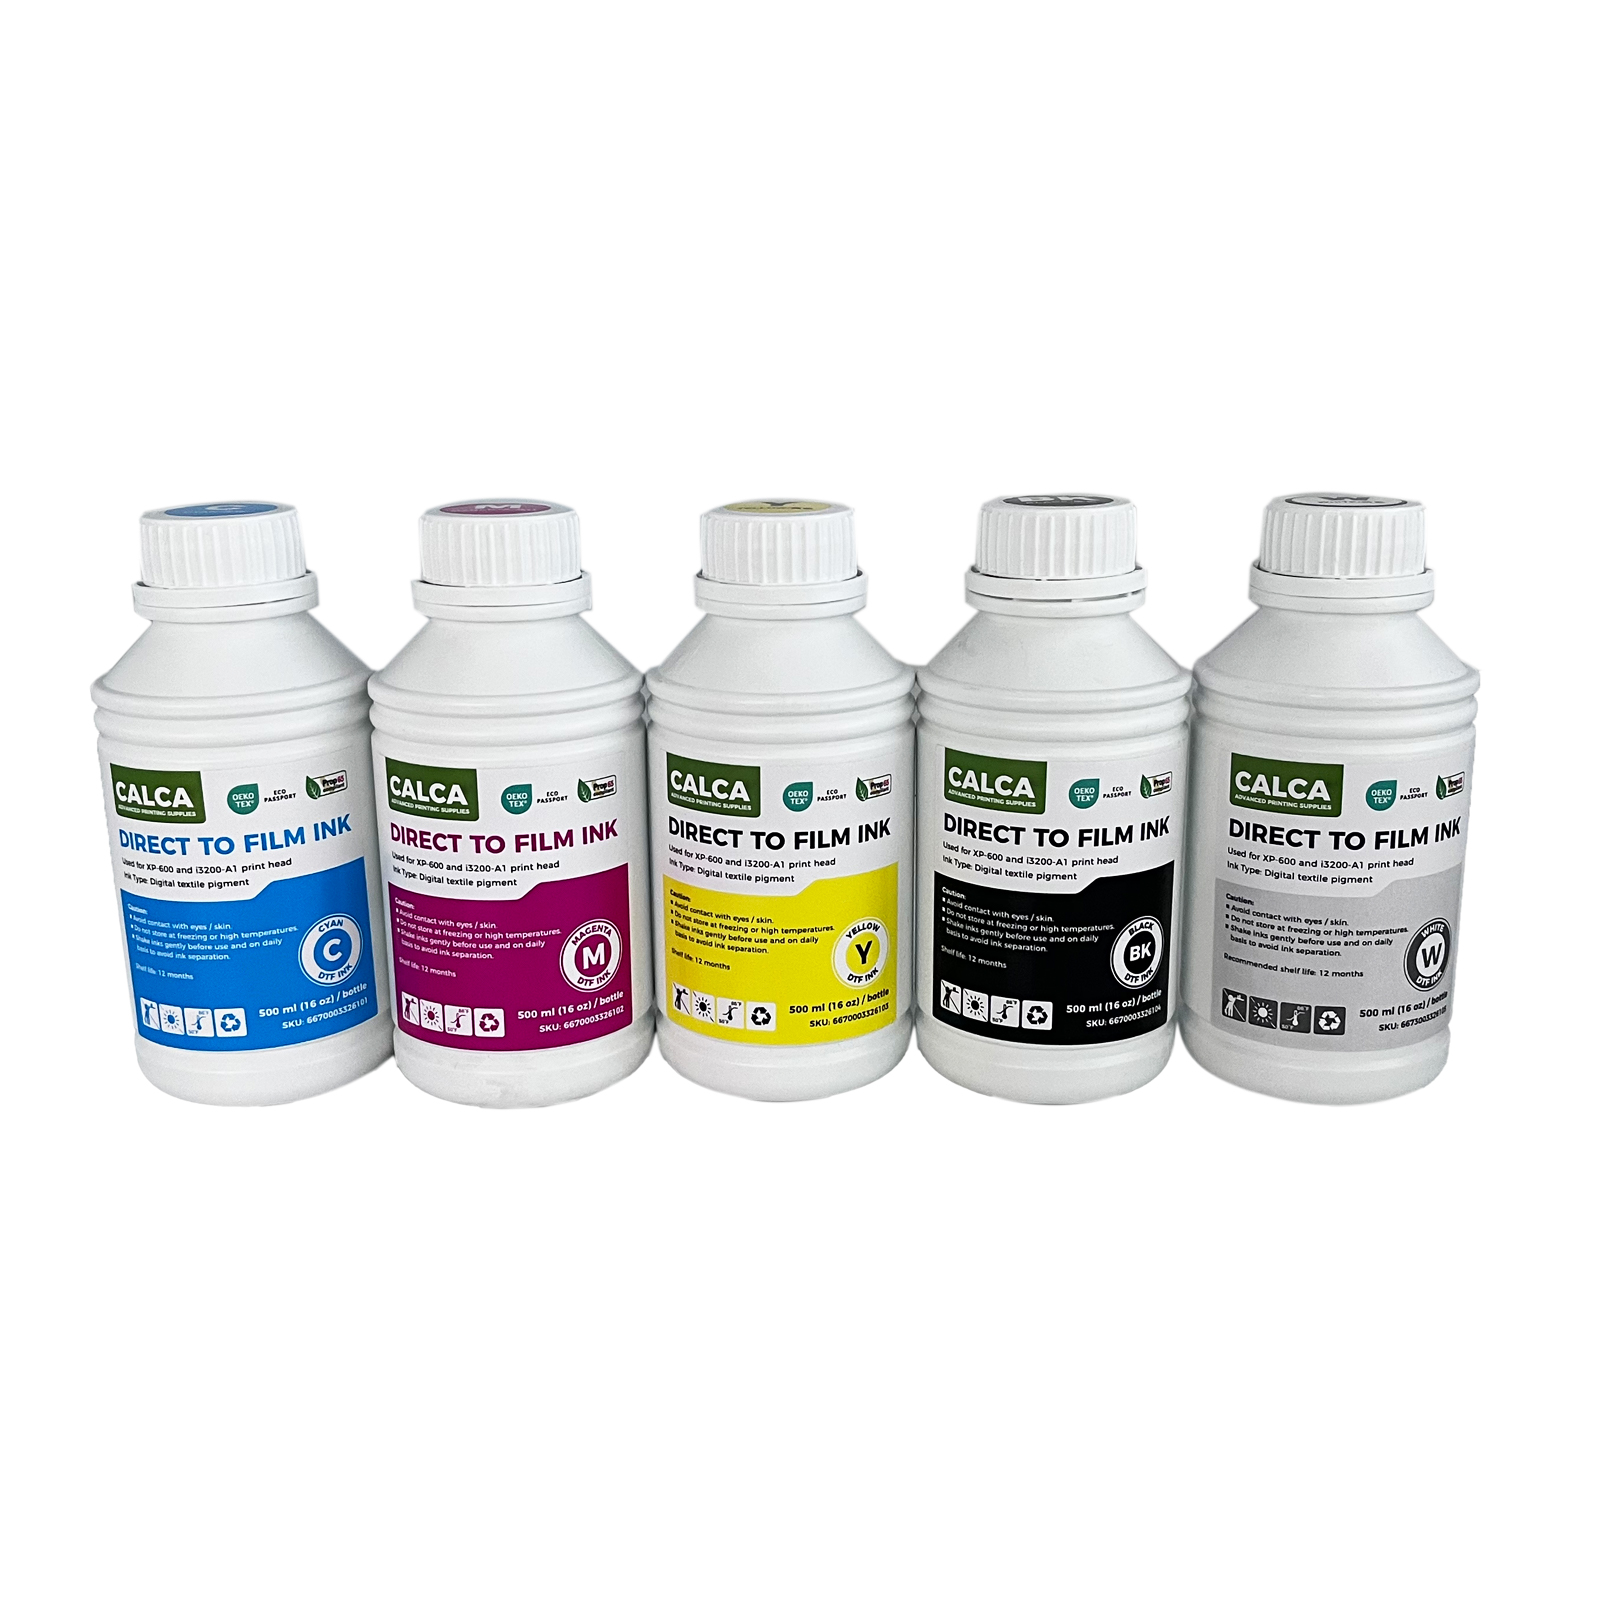 5 Colors(C M Y K W) CALCA Direct to Transfer Film Ink for Epson Printheads. 80 oz, Bottle of 500ml, Water-based DTF Inks